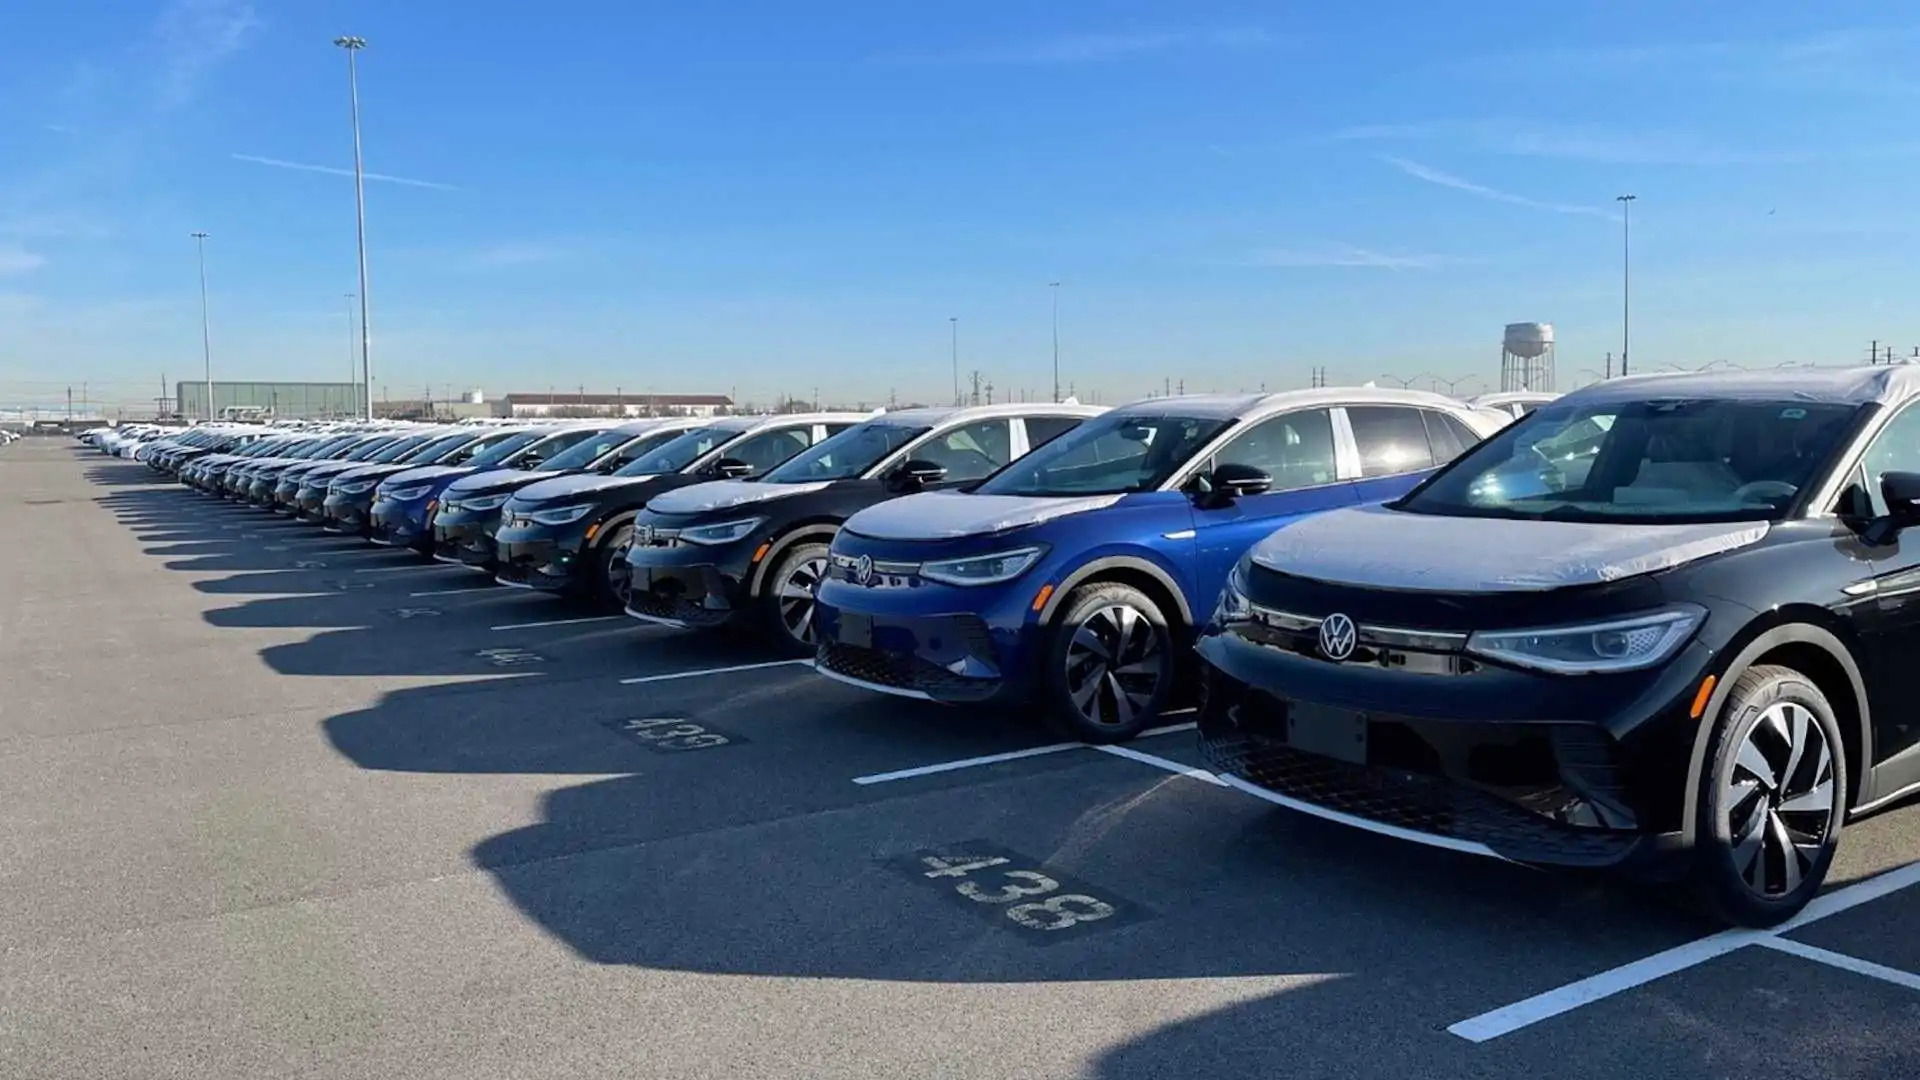 Price of used EVs might crash due to fleet dumping - InsideEVs.